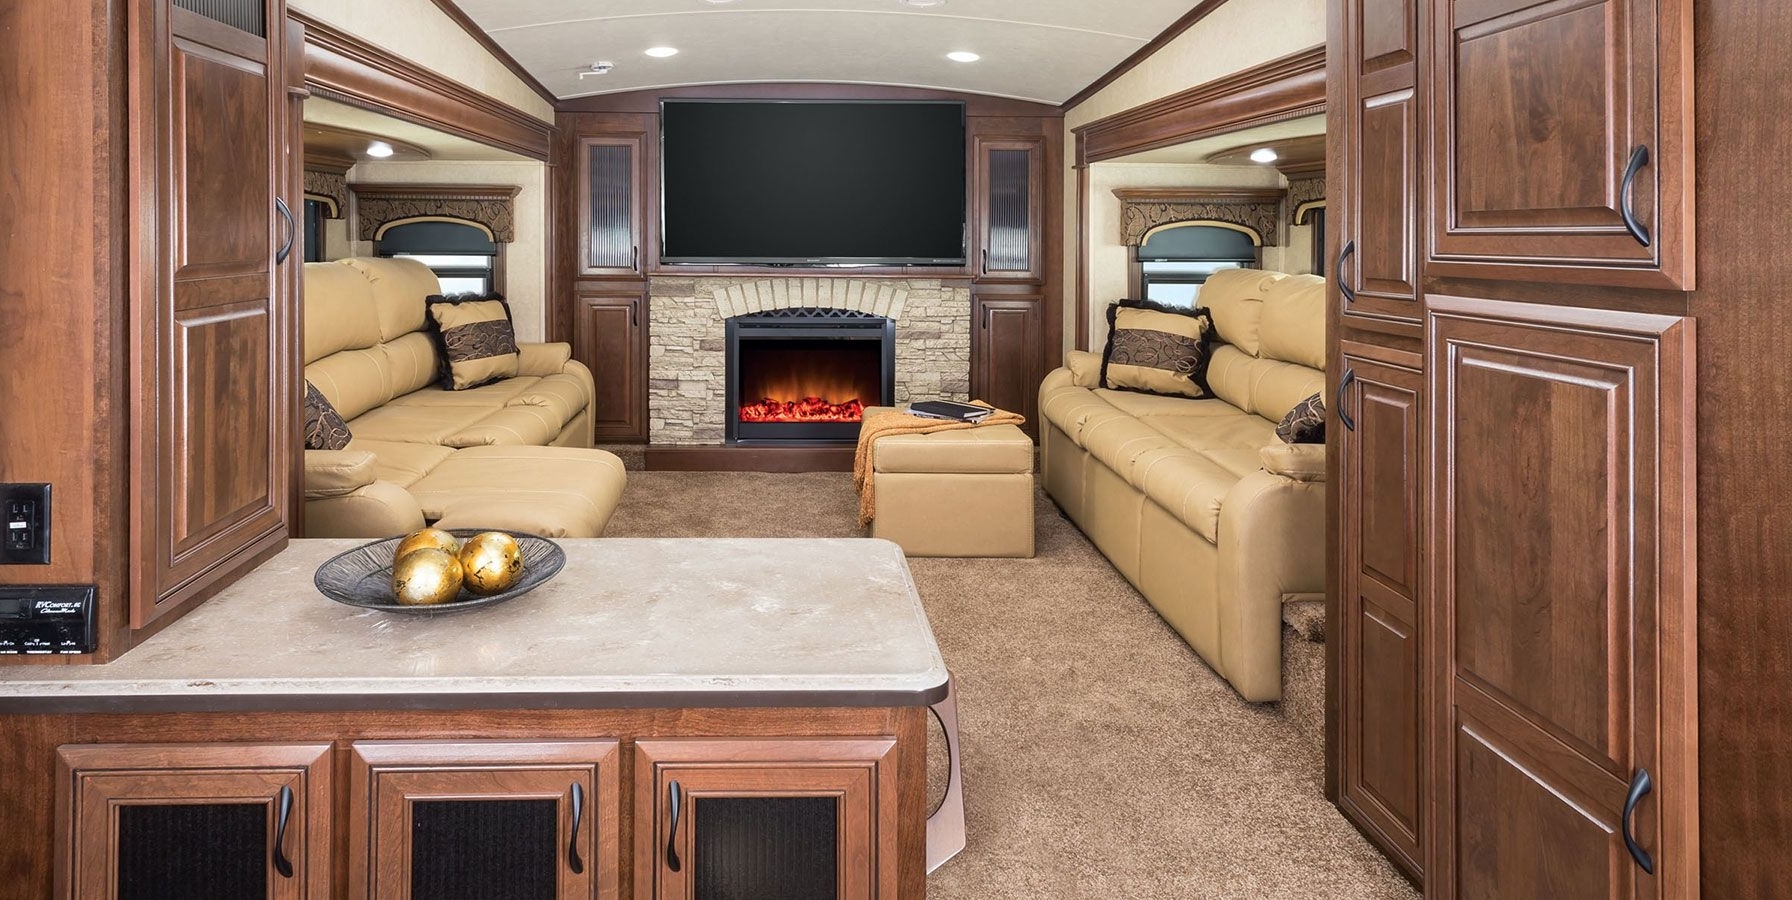 Fifth Wheel Campers With Living Room Upstairs